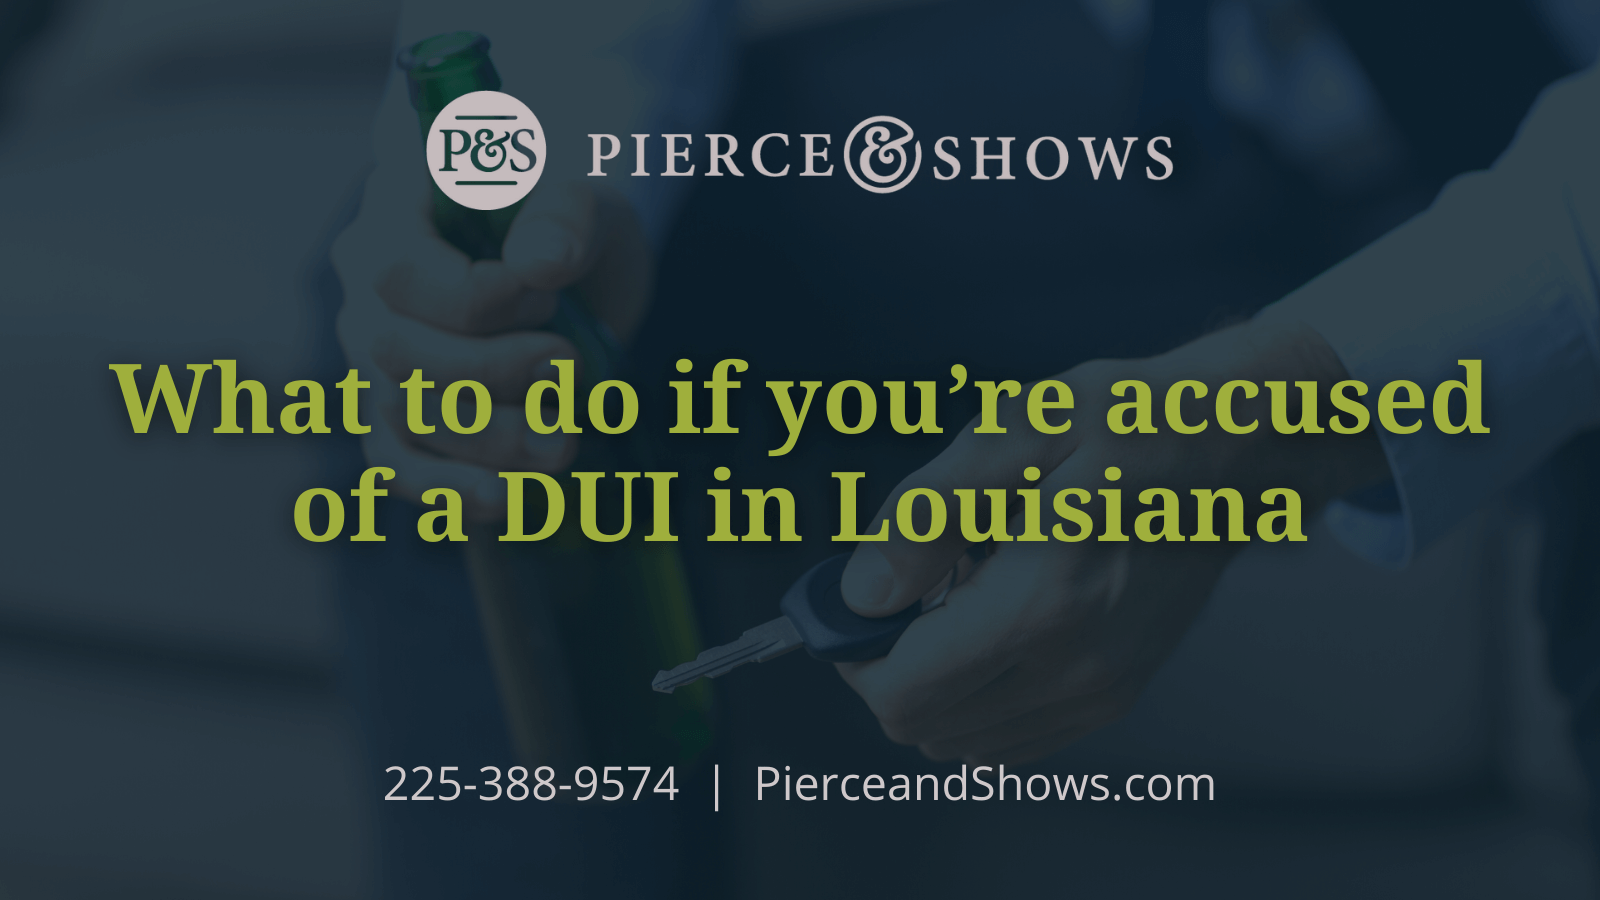 What to do if you’re accused of a DUI in Louisiana - Baton Rouge Louisiana injury attorney Pierce & Shows (1)